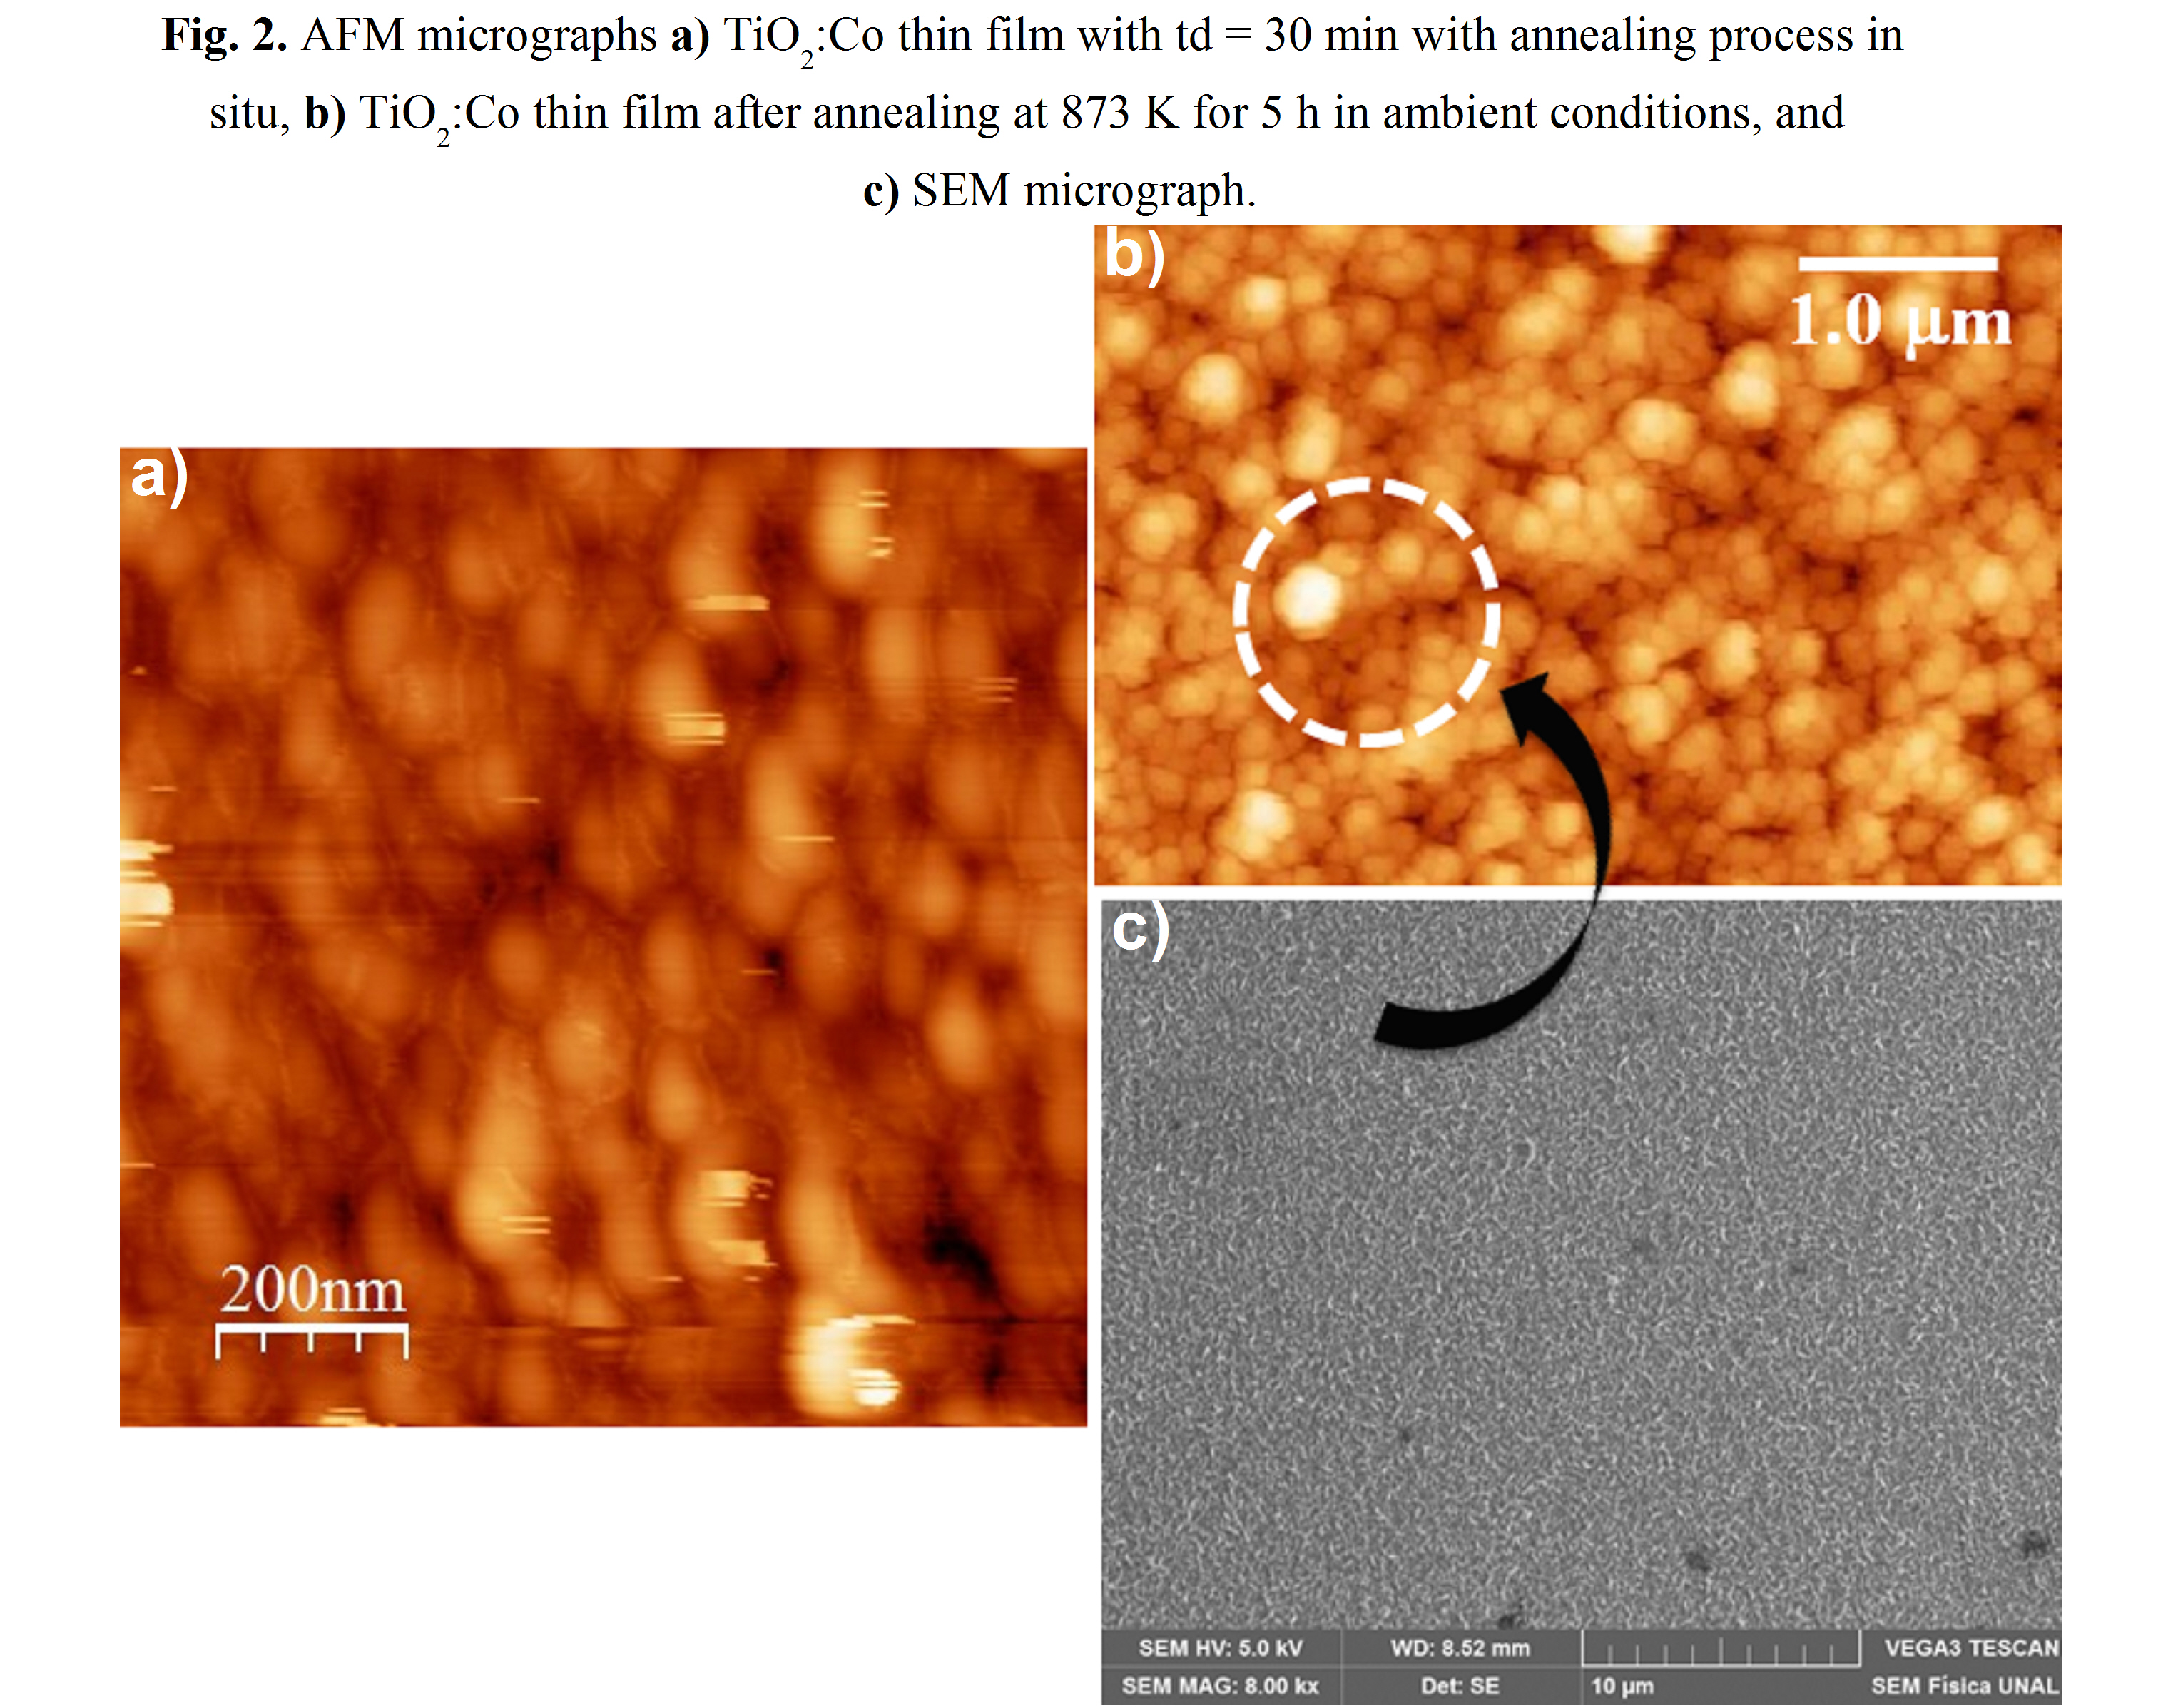 AFM micrographs a) TiO2:Co thin film with td = 30 min with annealing process in situ, b) TiO2:Co thin film after annealing at 873 K for 5 h in ambient conditions, and c) SEM micrograph.